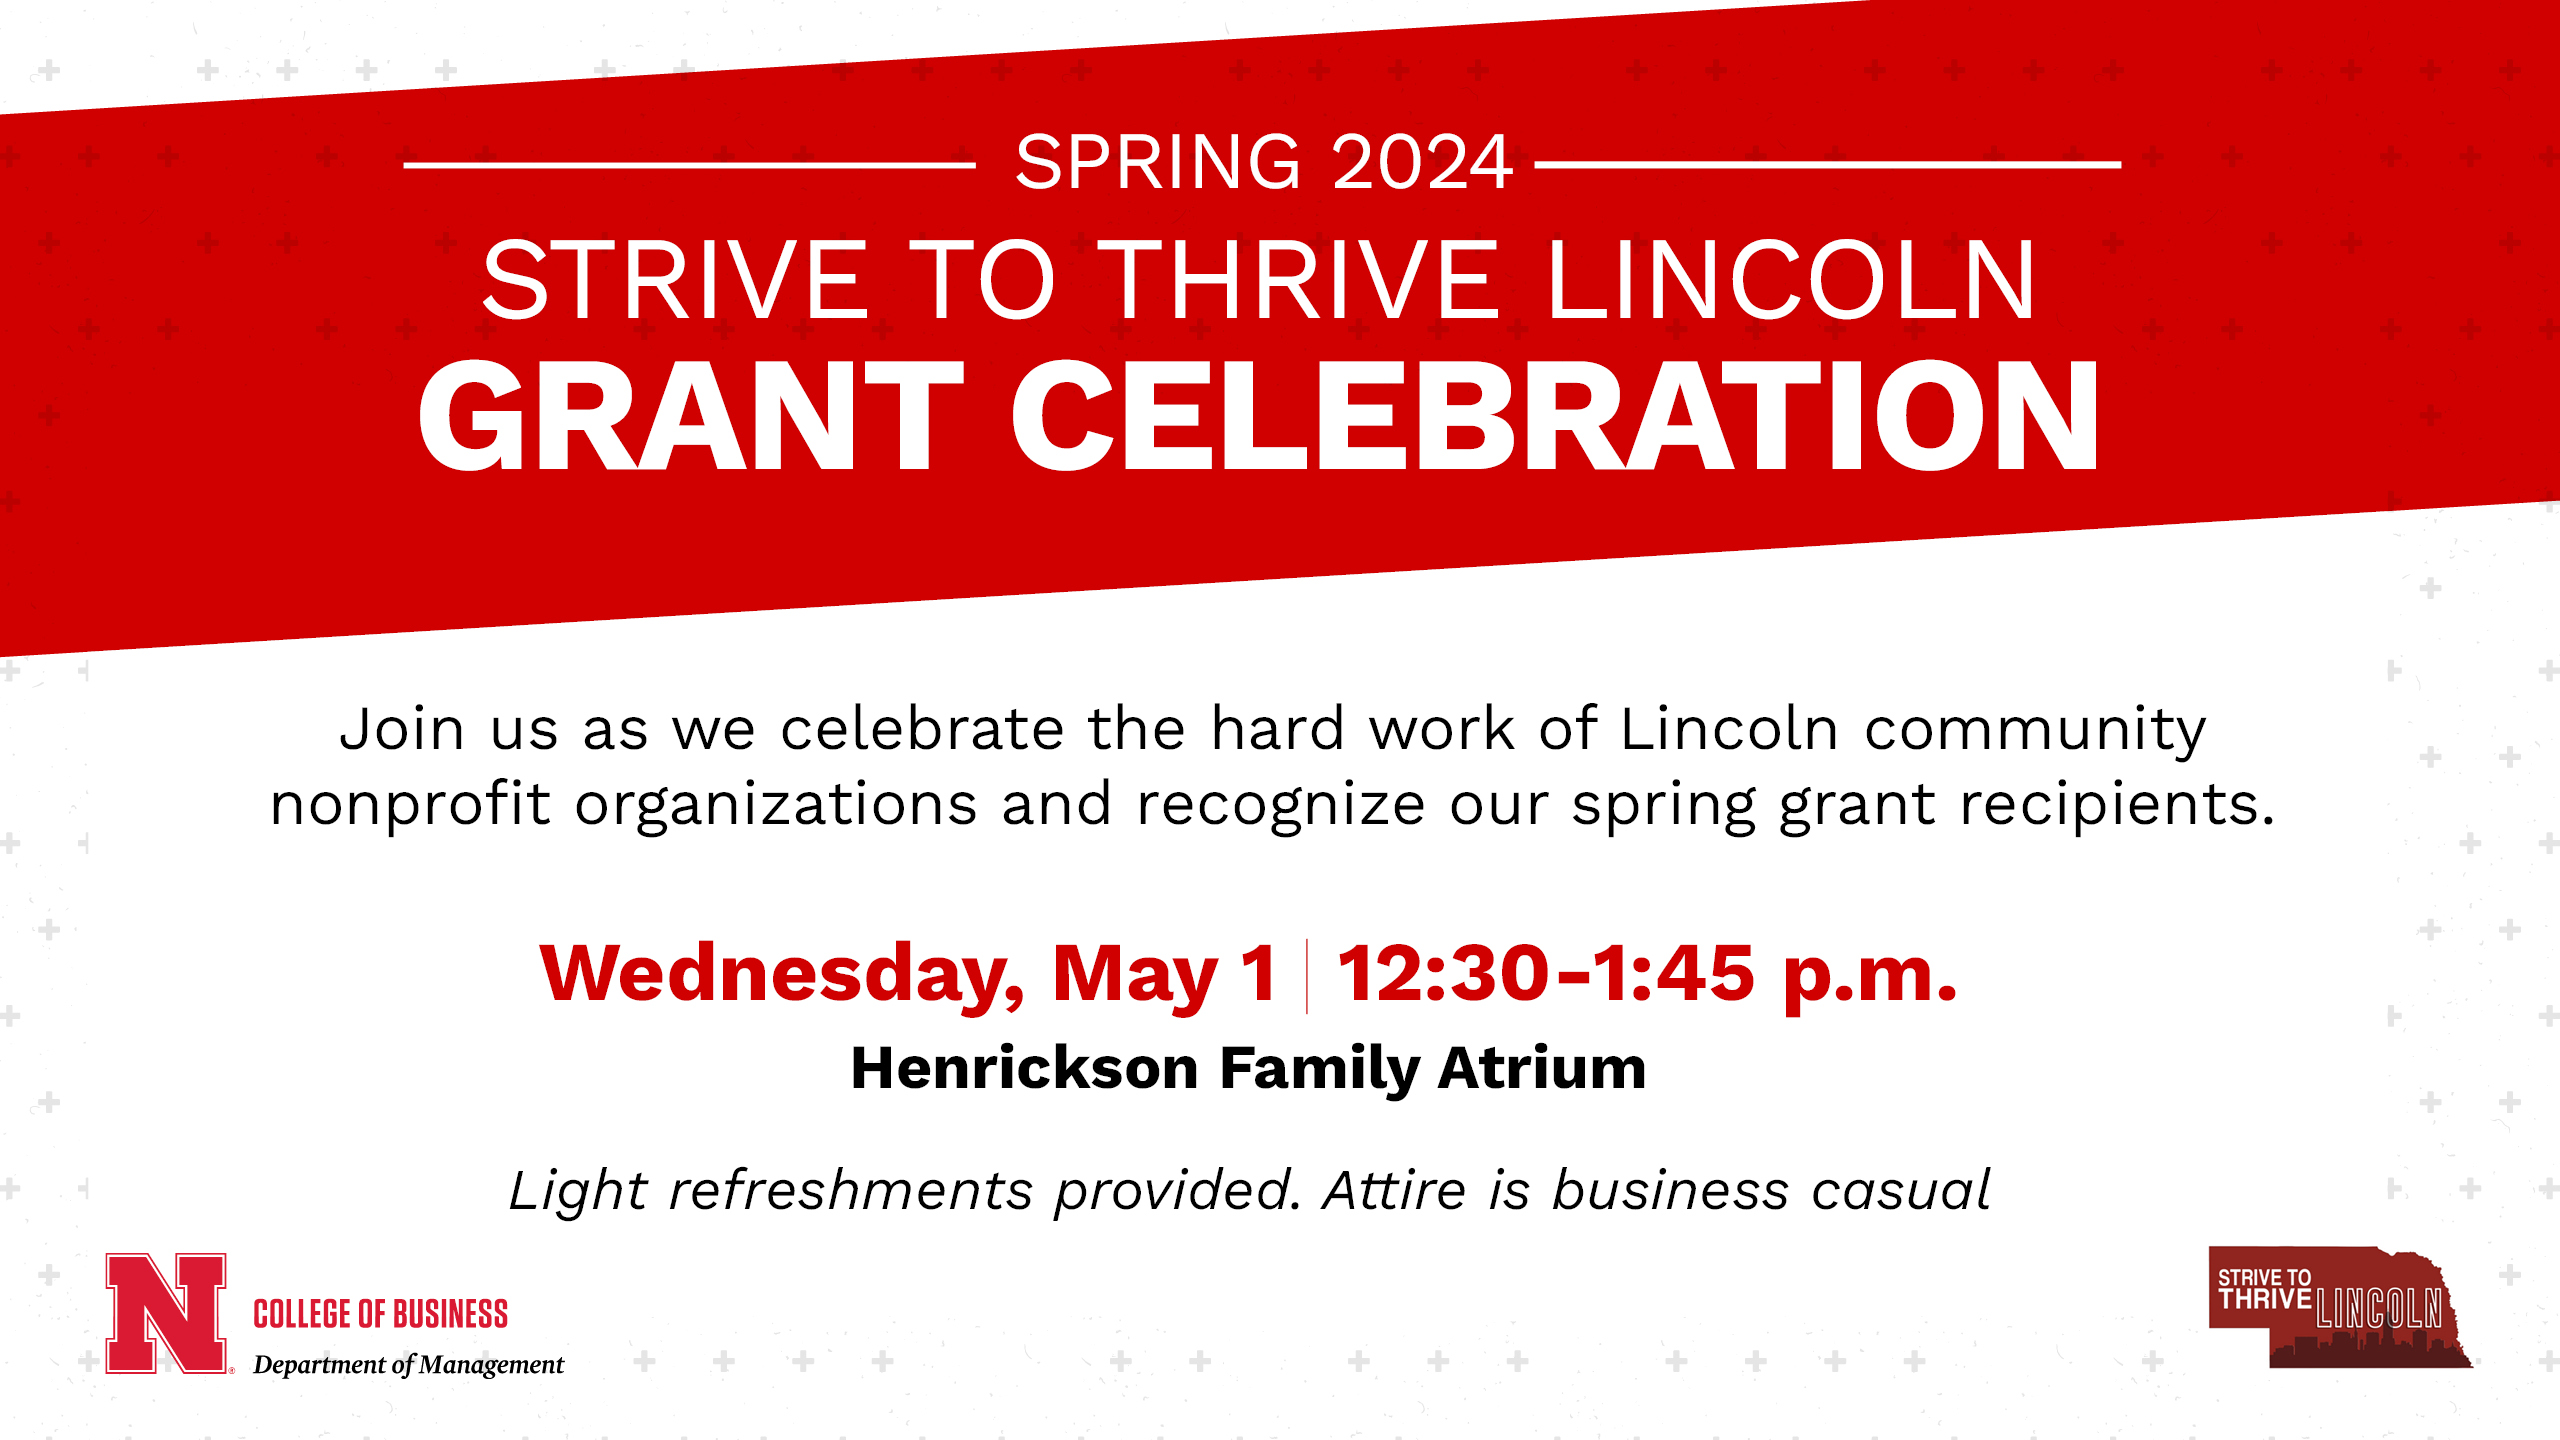 Strive to Thrive Lincoln Grant Celebration | Wednesday, May 1 from 12:30 to 1:15 p.m. | Henrickson Family Atrium